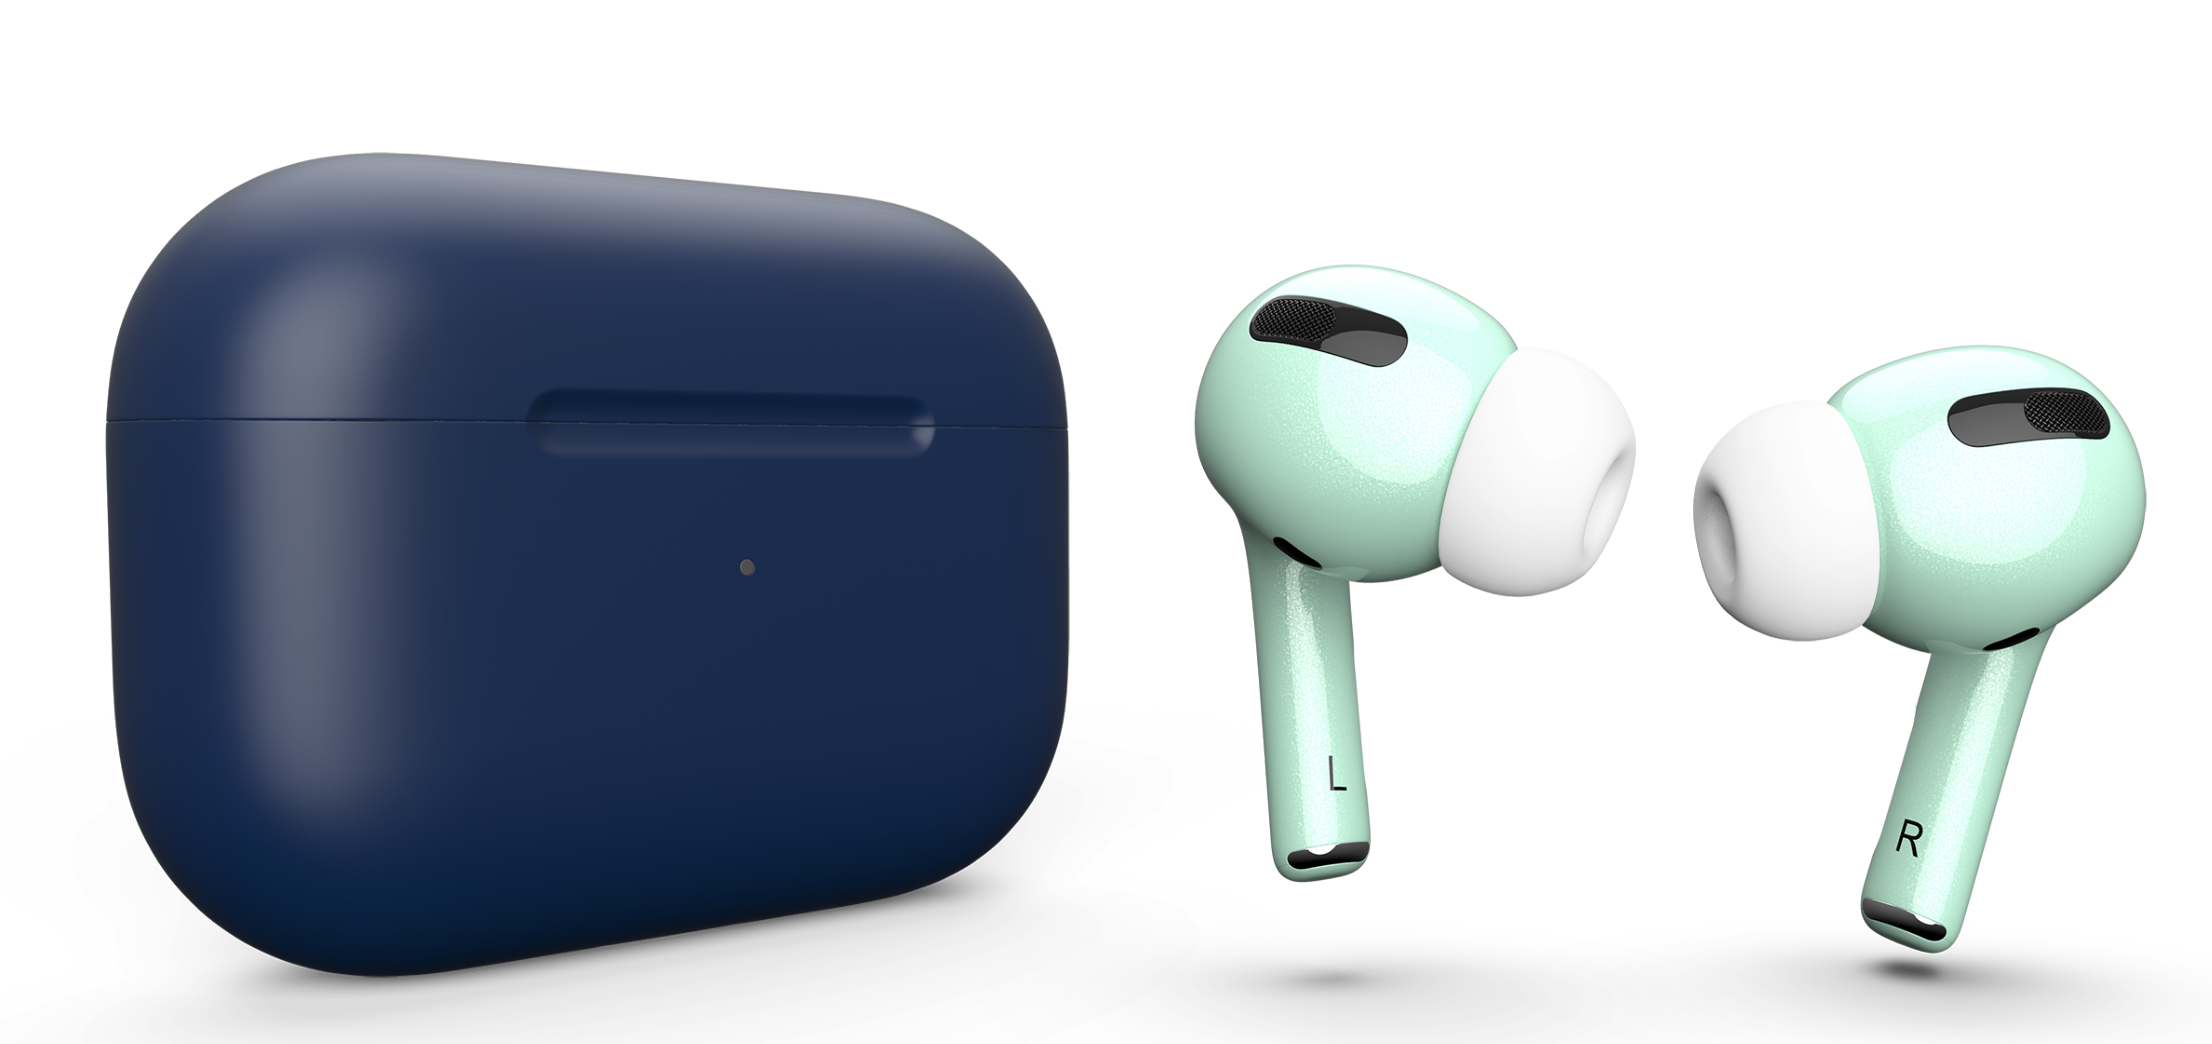 ColorWare is the way to buy incredible custom color AirPods Pro